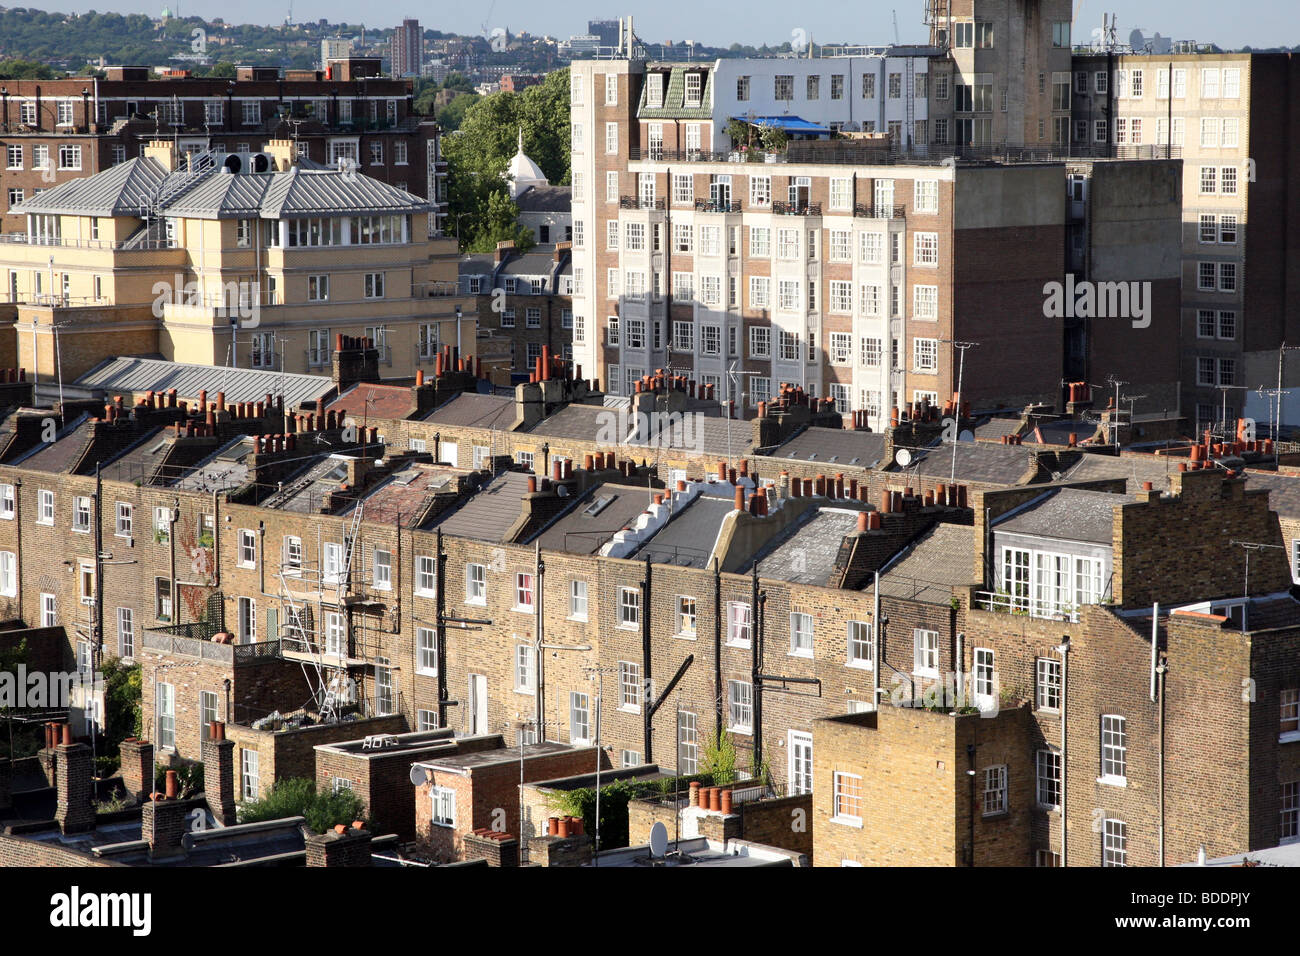 Aeriel view of housing in London east of Marylebone Station Stock Photo